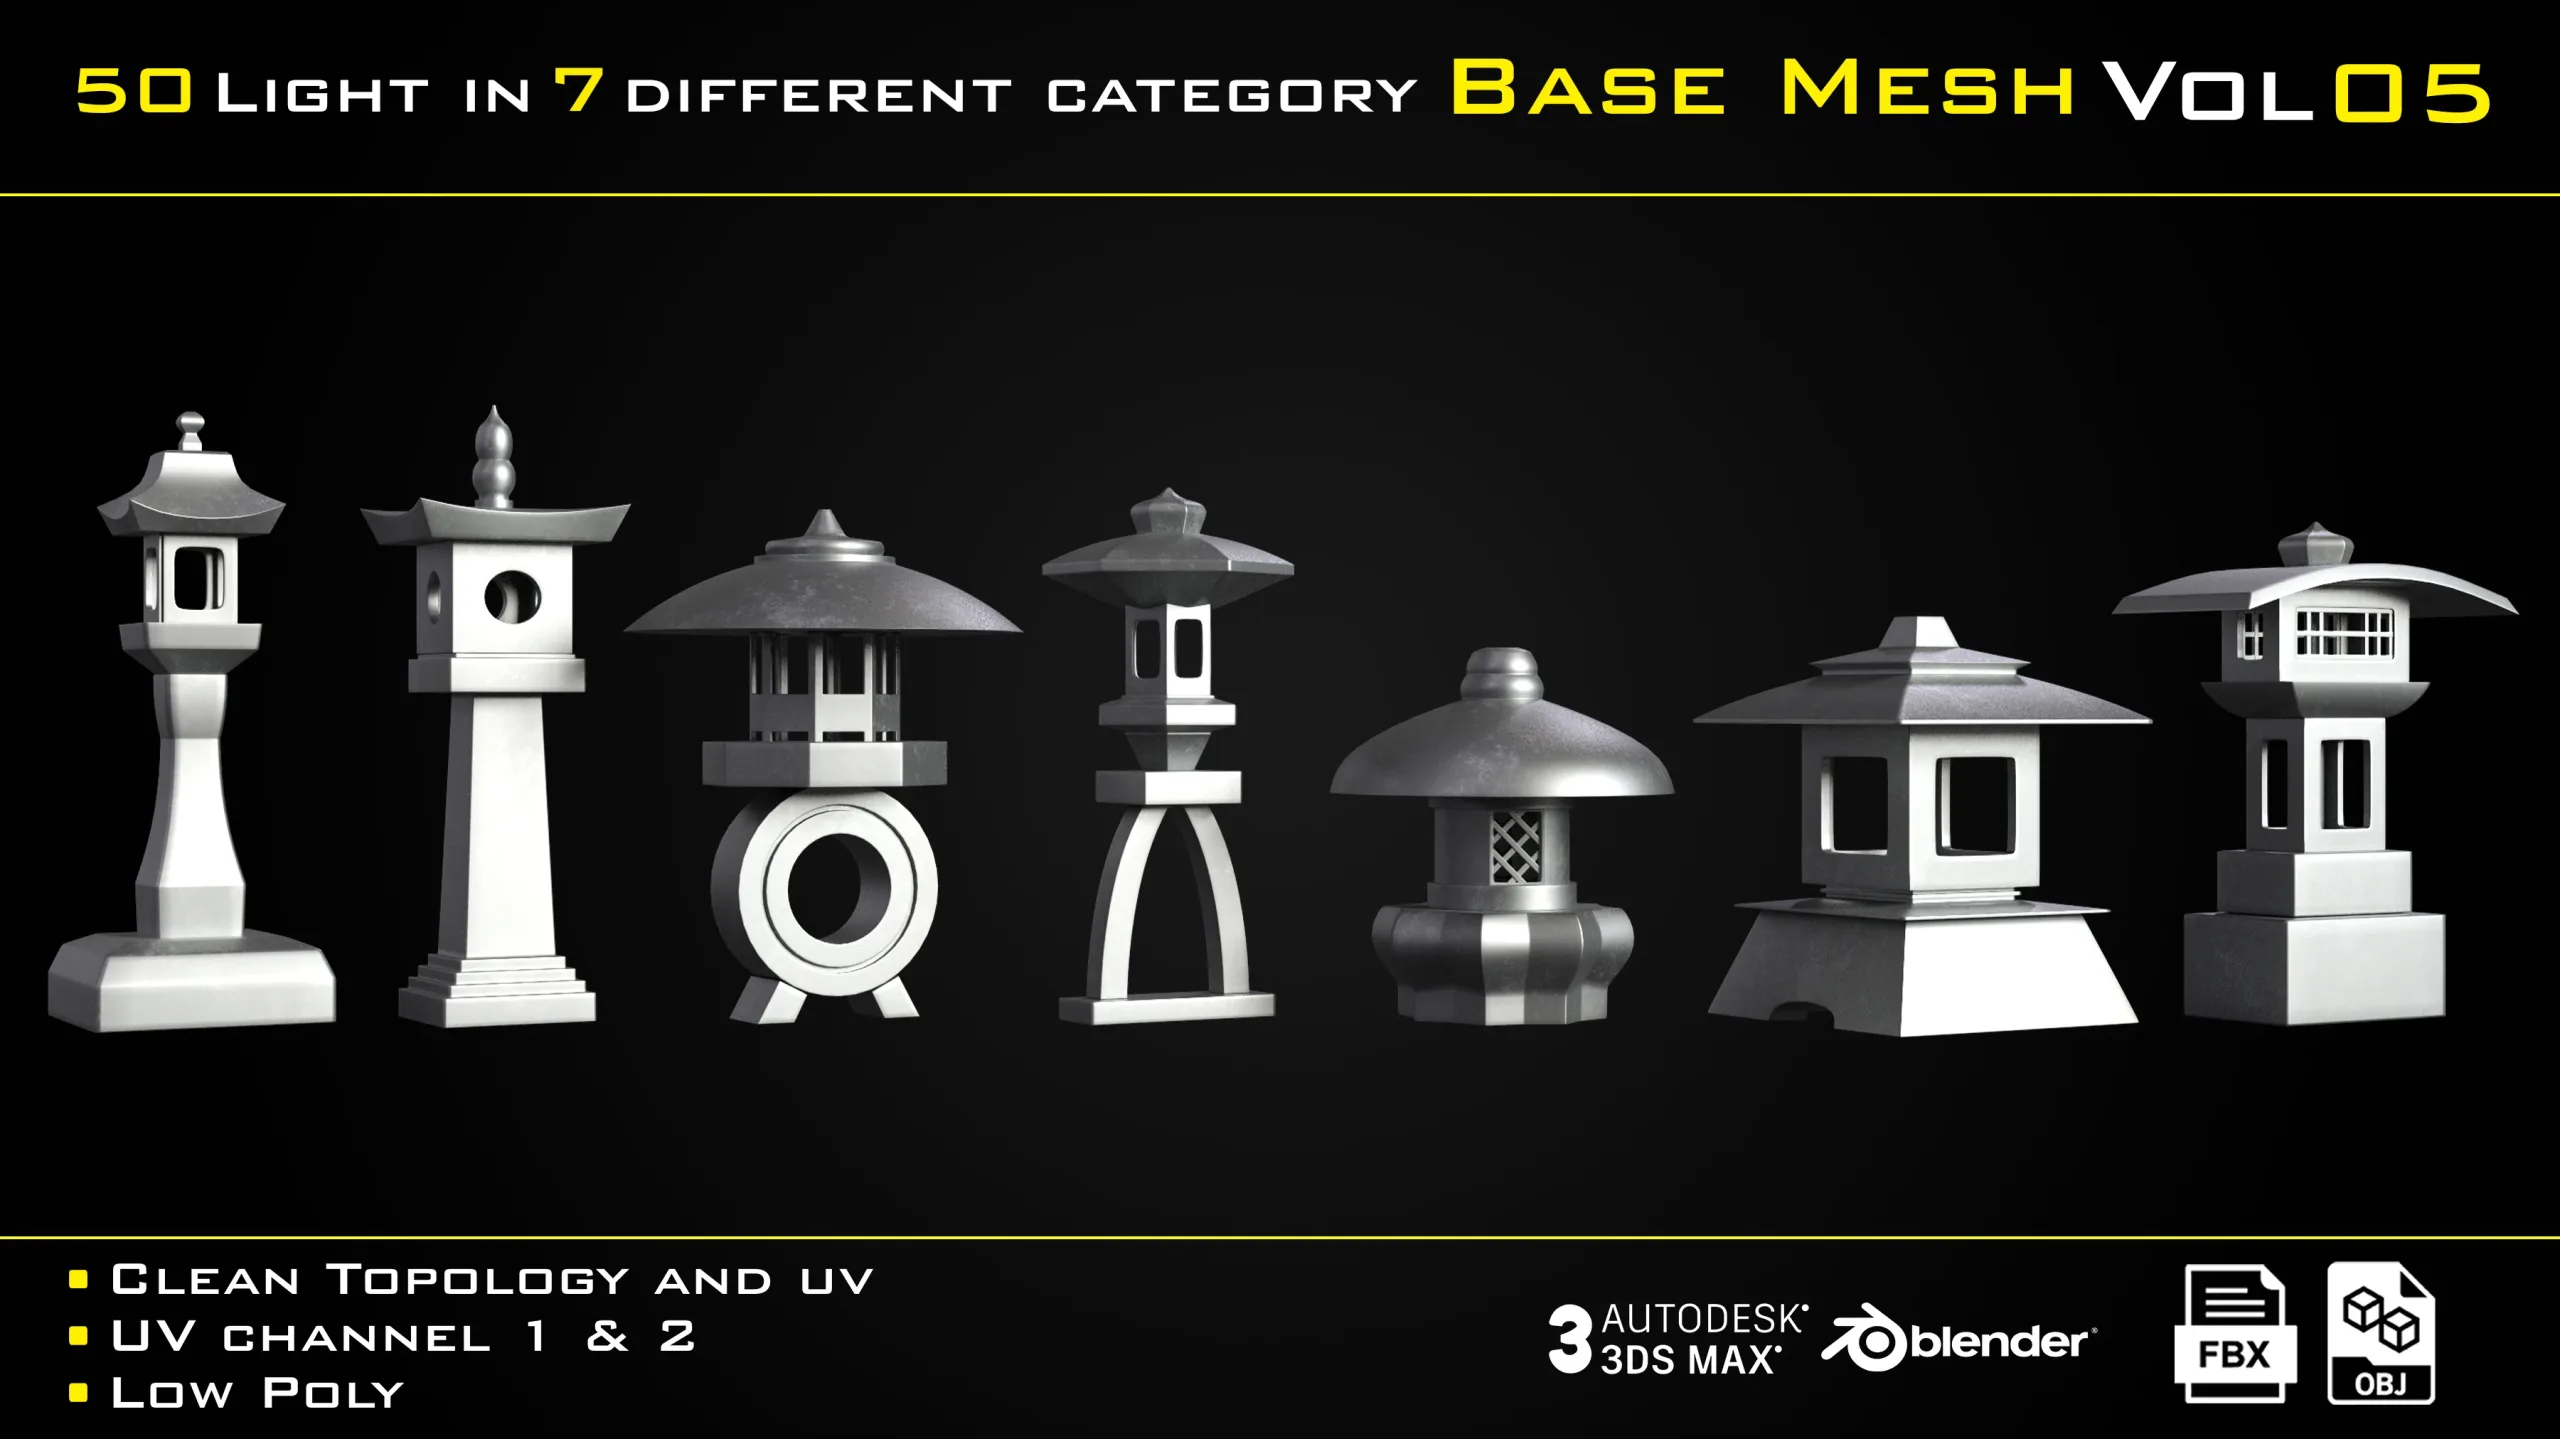 50 Light in 7 different category BASE MESH - VOL 05